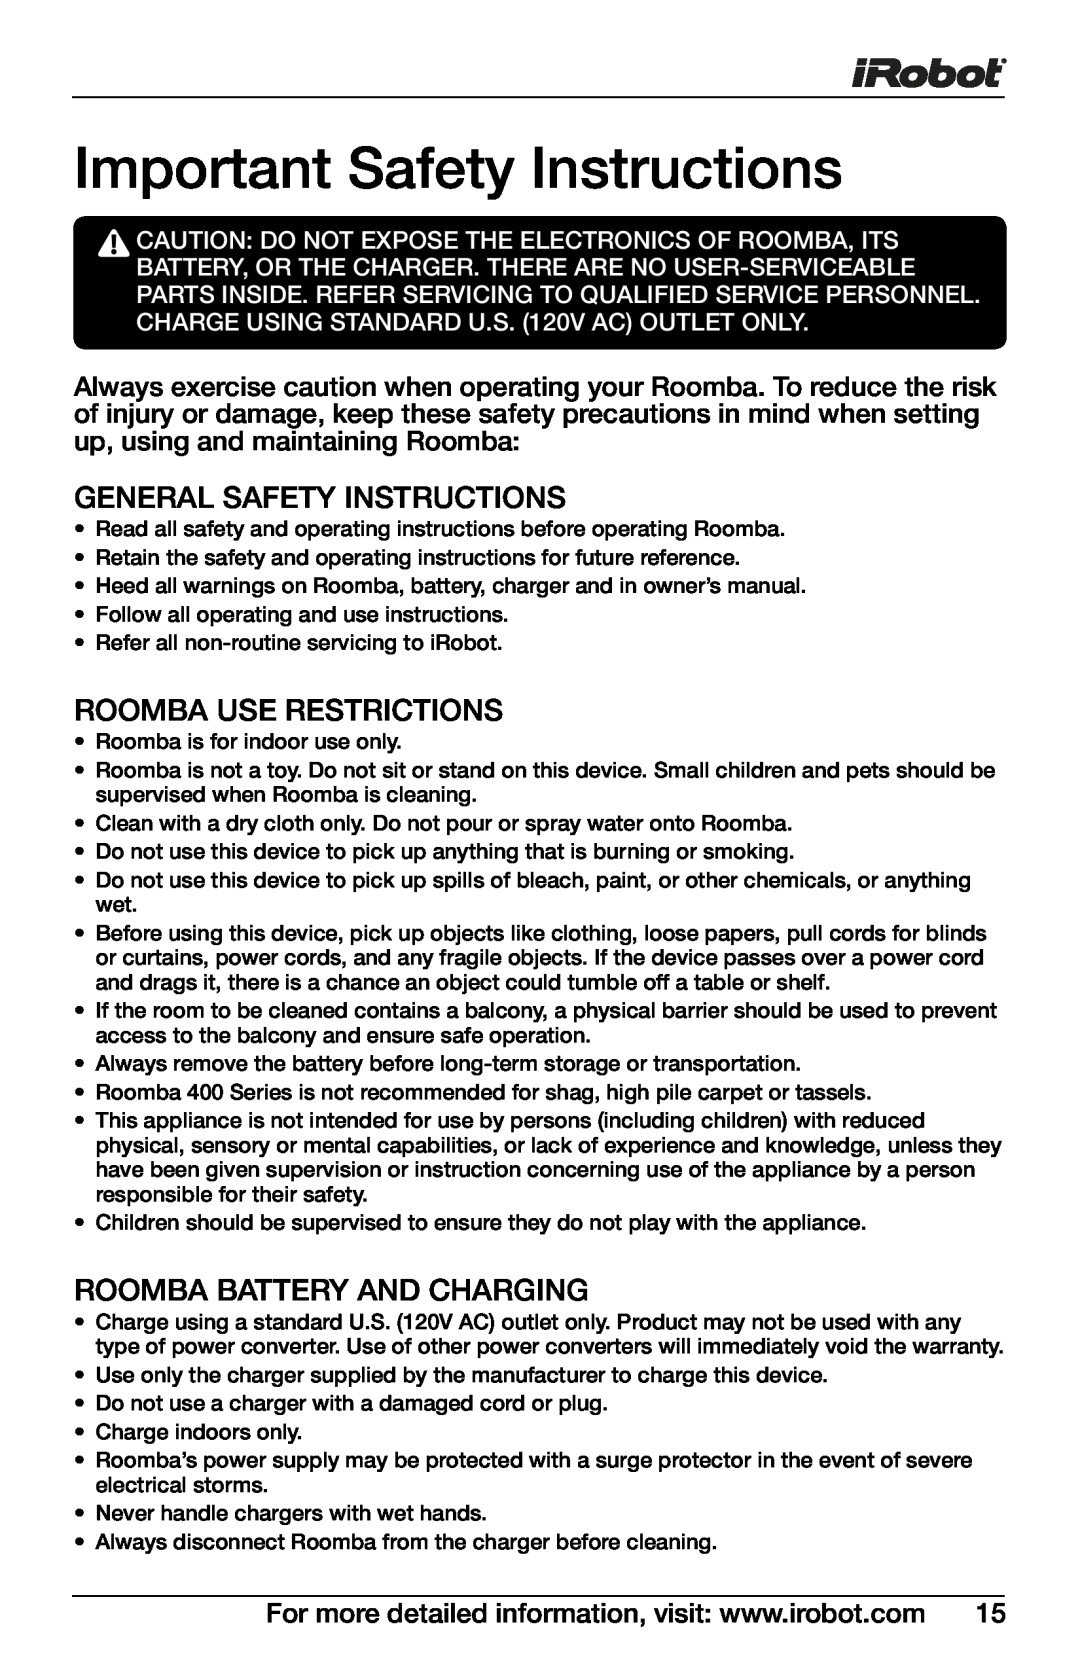 iRobot 430, 400 Series manual Important Safety Instructions, General Safety Instructions, Roomba Use Restrictions 